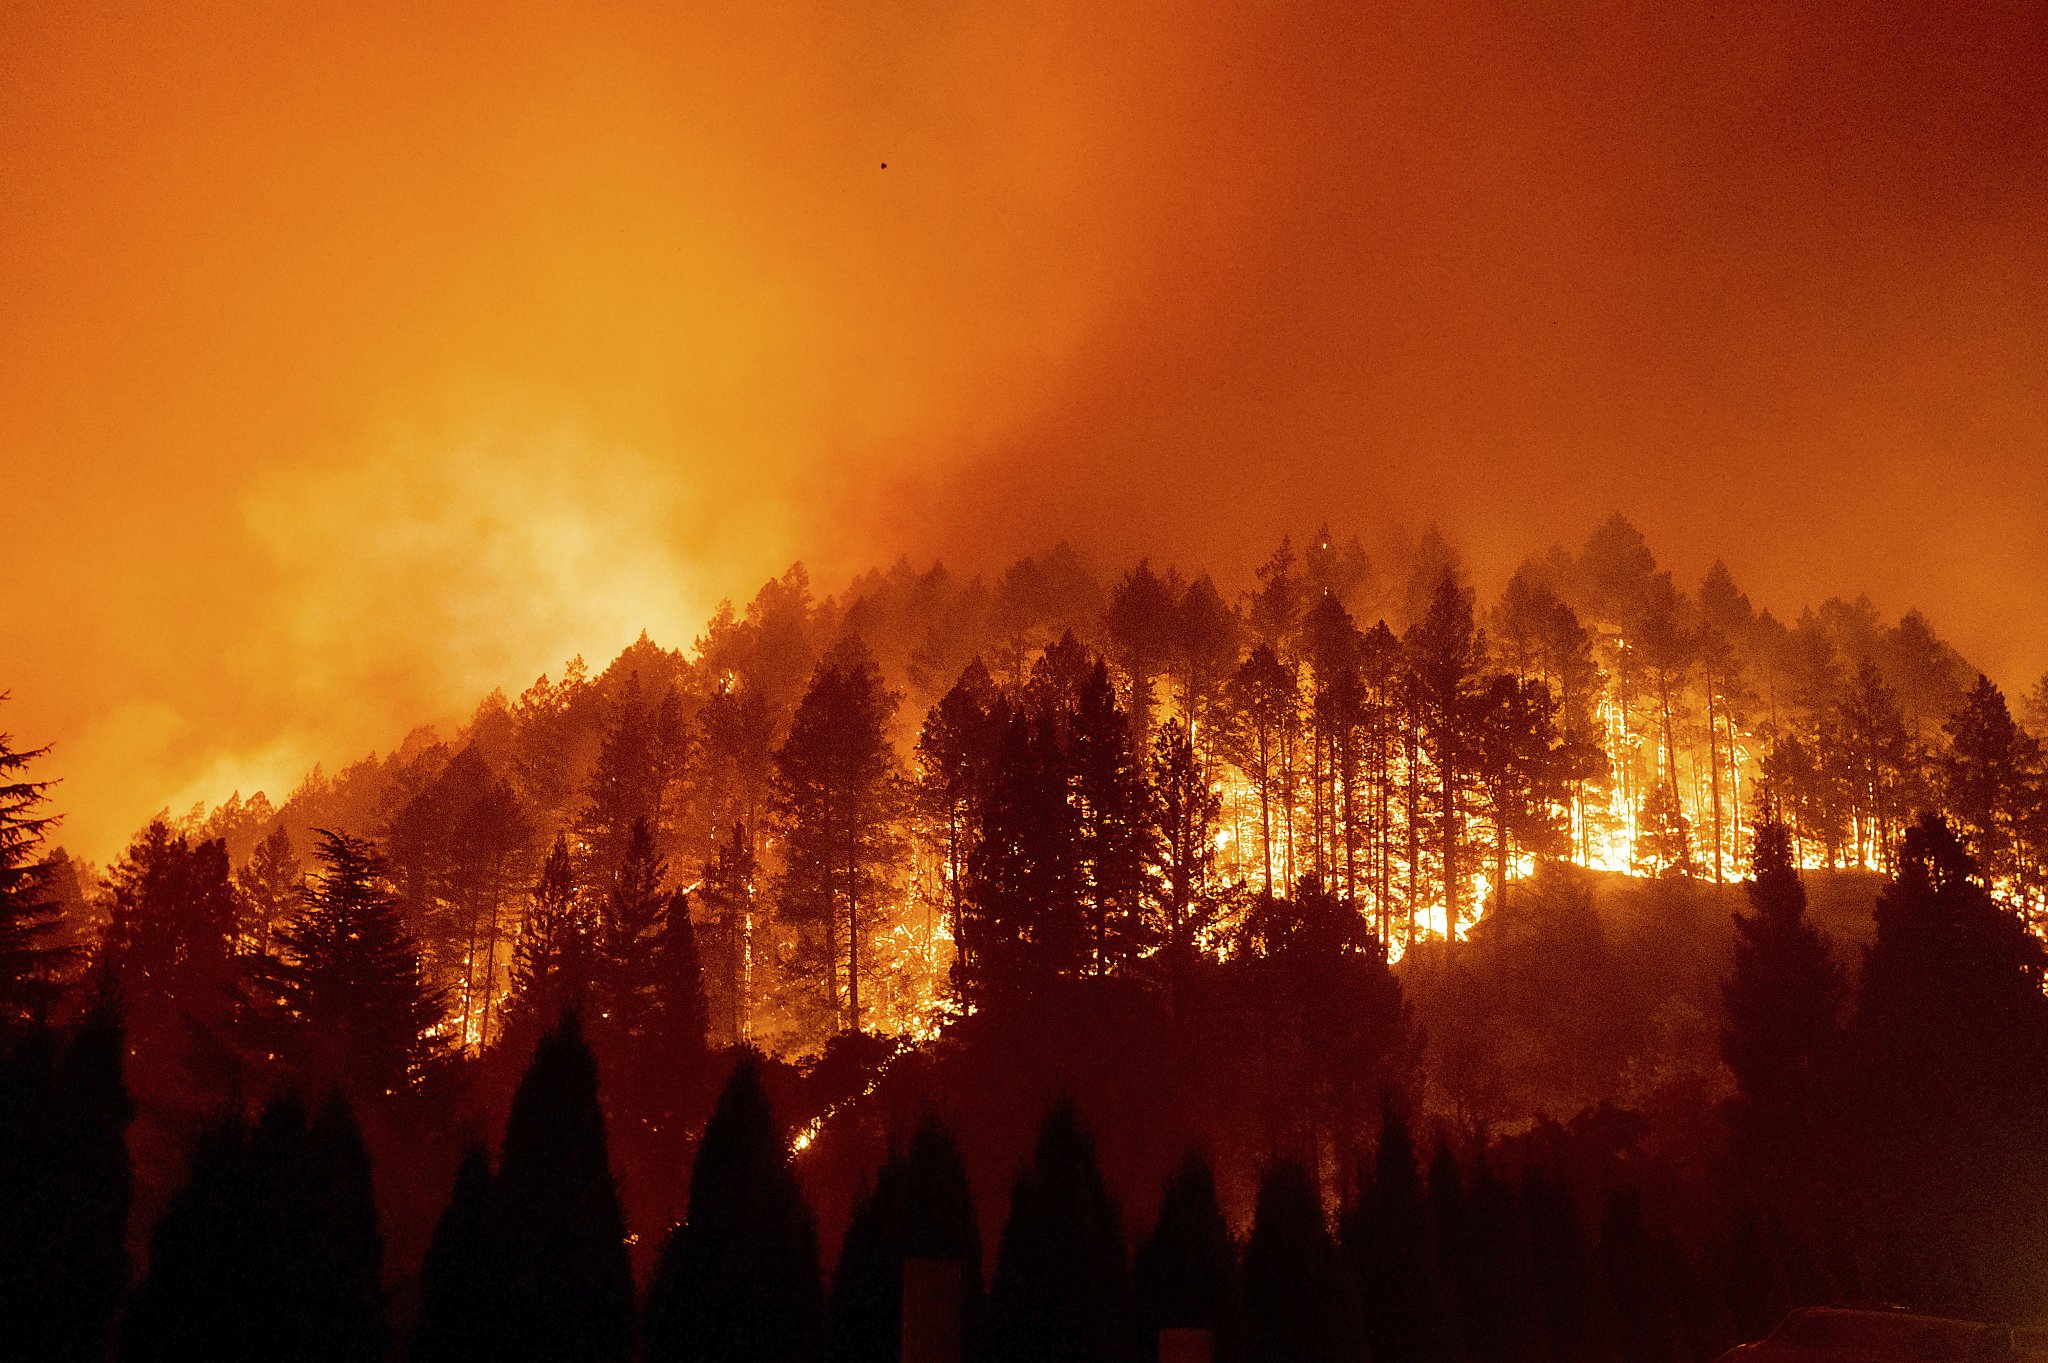 Wildfire safety starts with communities, not cutting forests